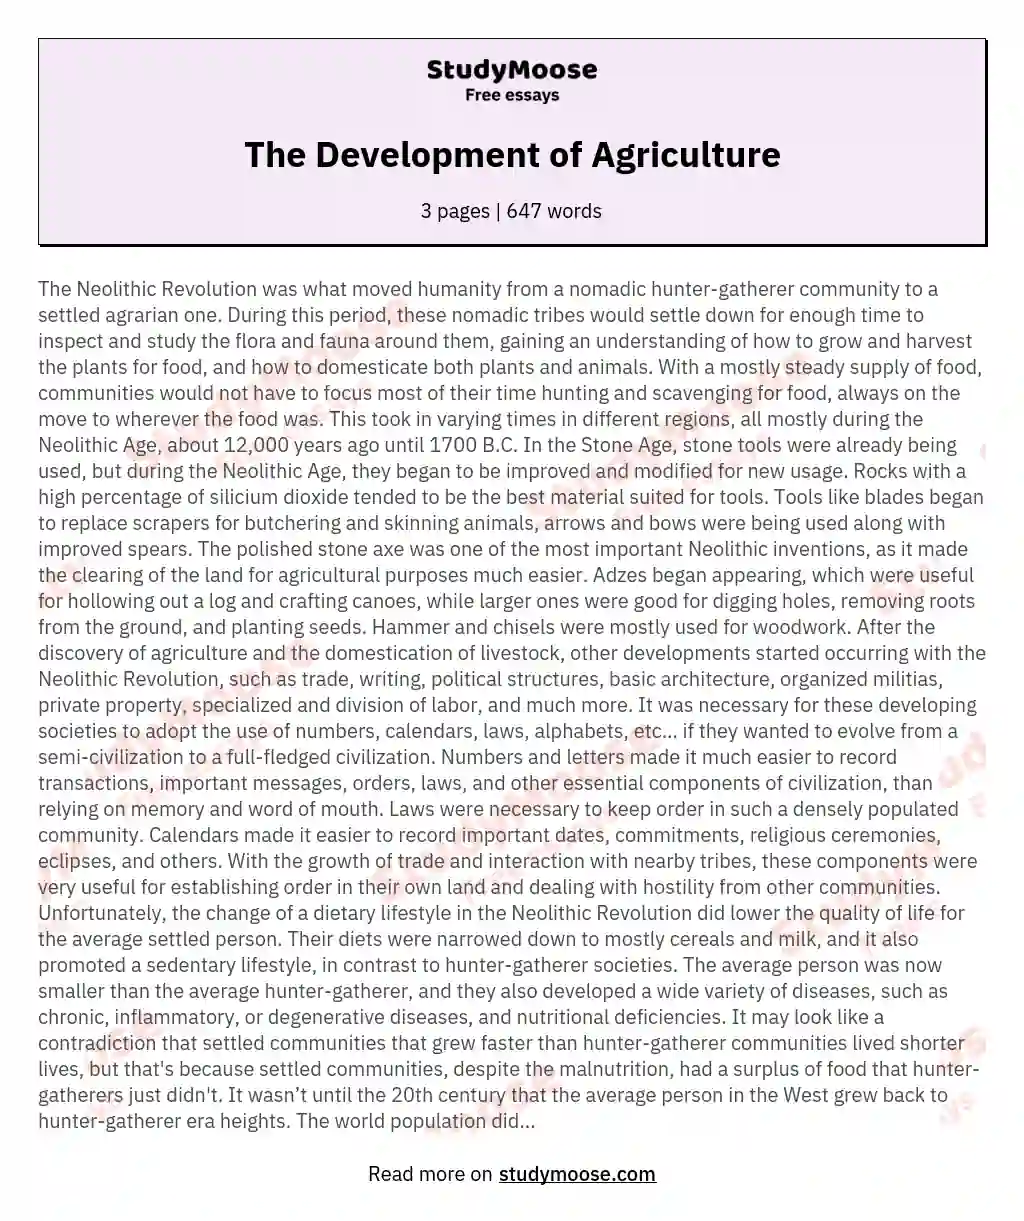 The Development of Agriculture essay